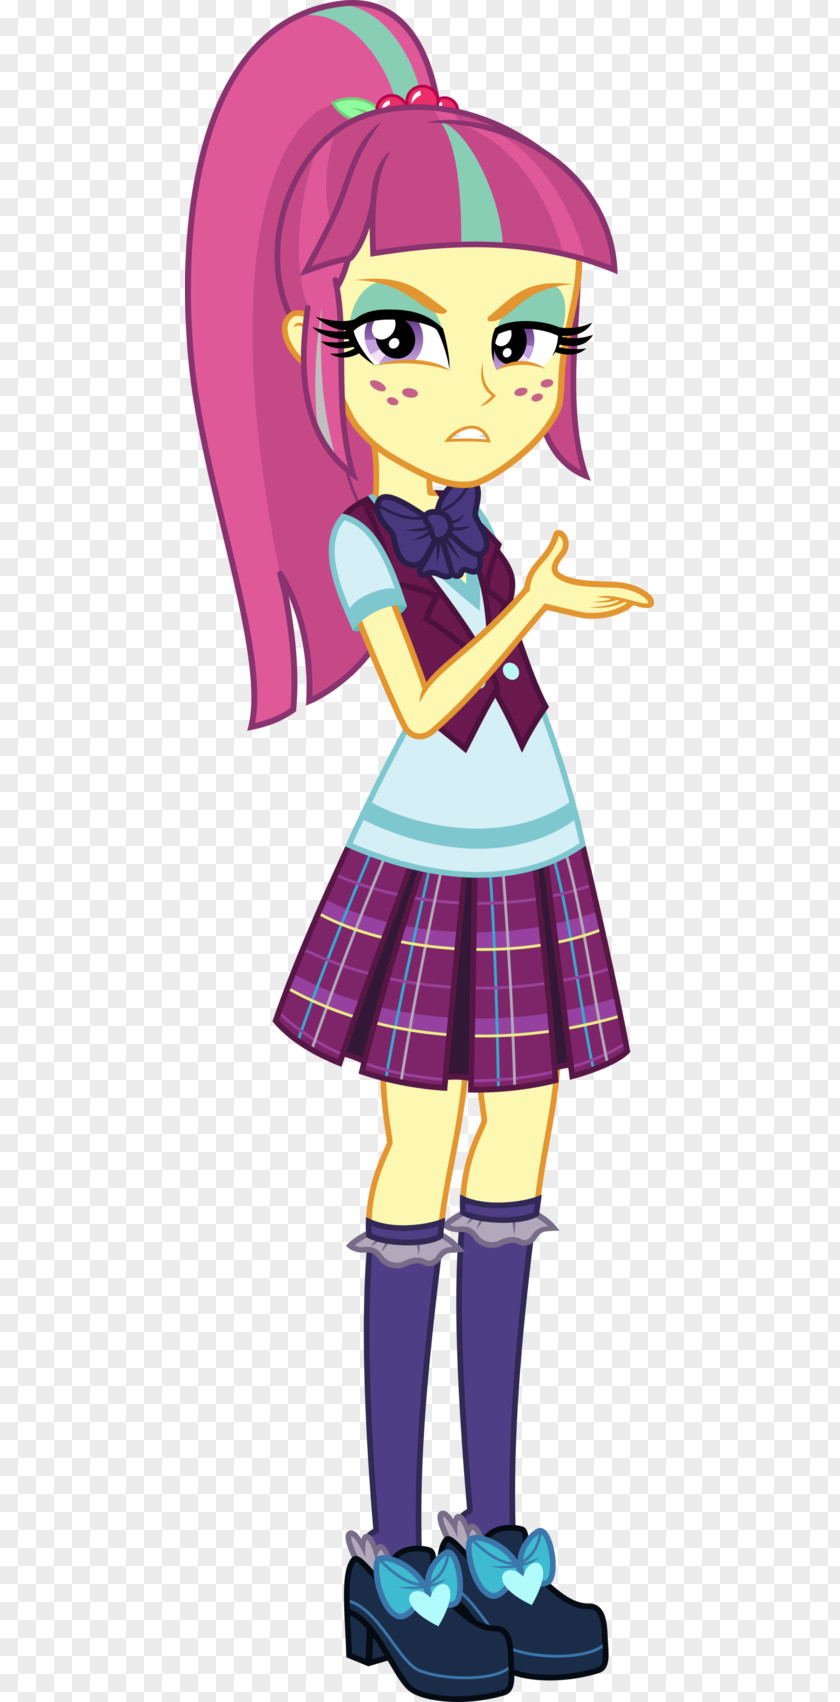 SWEET AND SOUR Sour Sweet My Little Pony: Equestria Girls Rarity Twilight Sparkle PNG